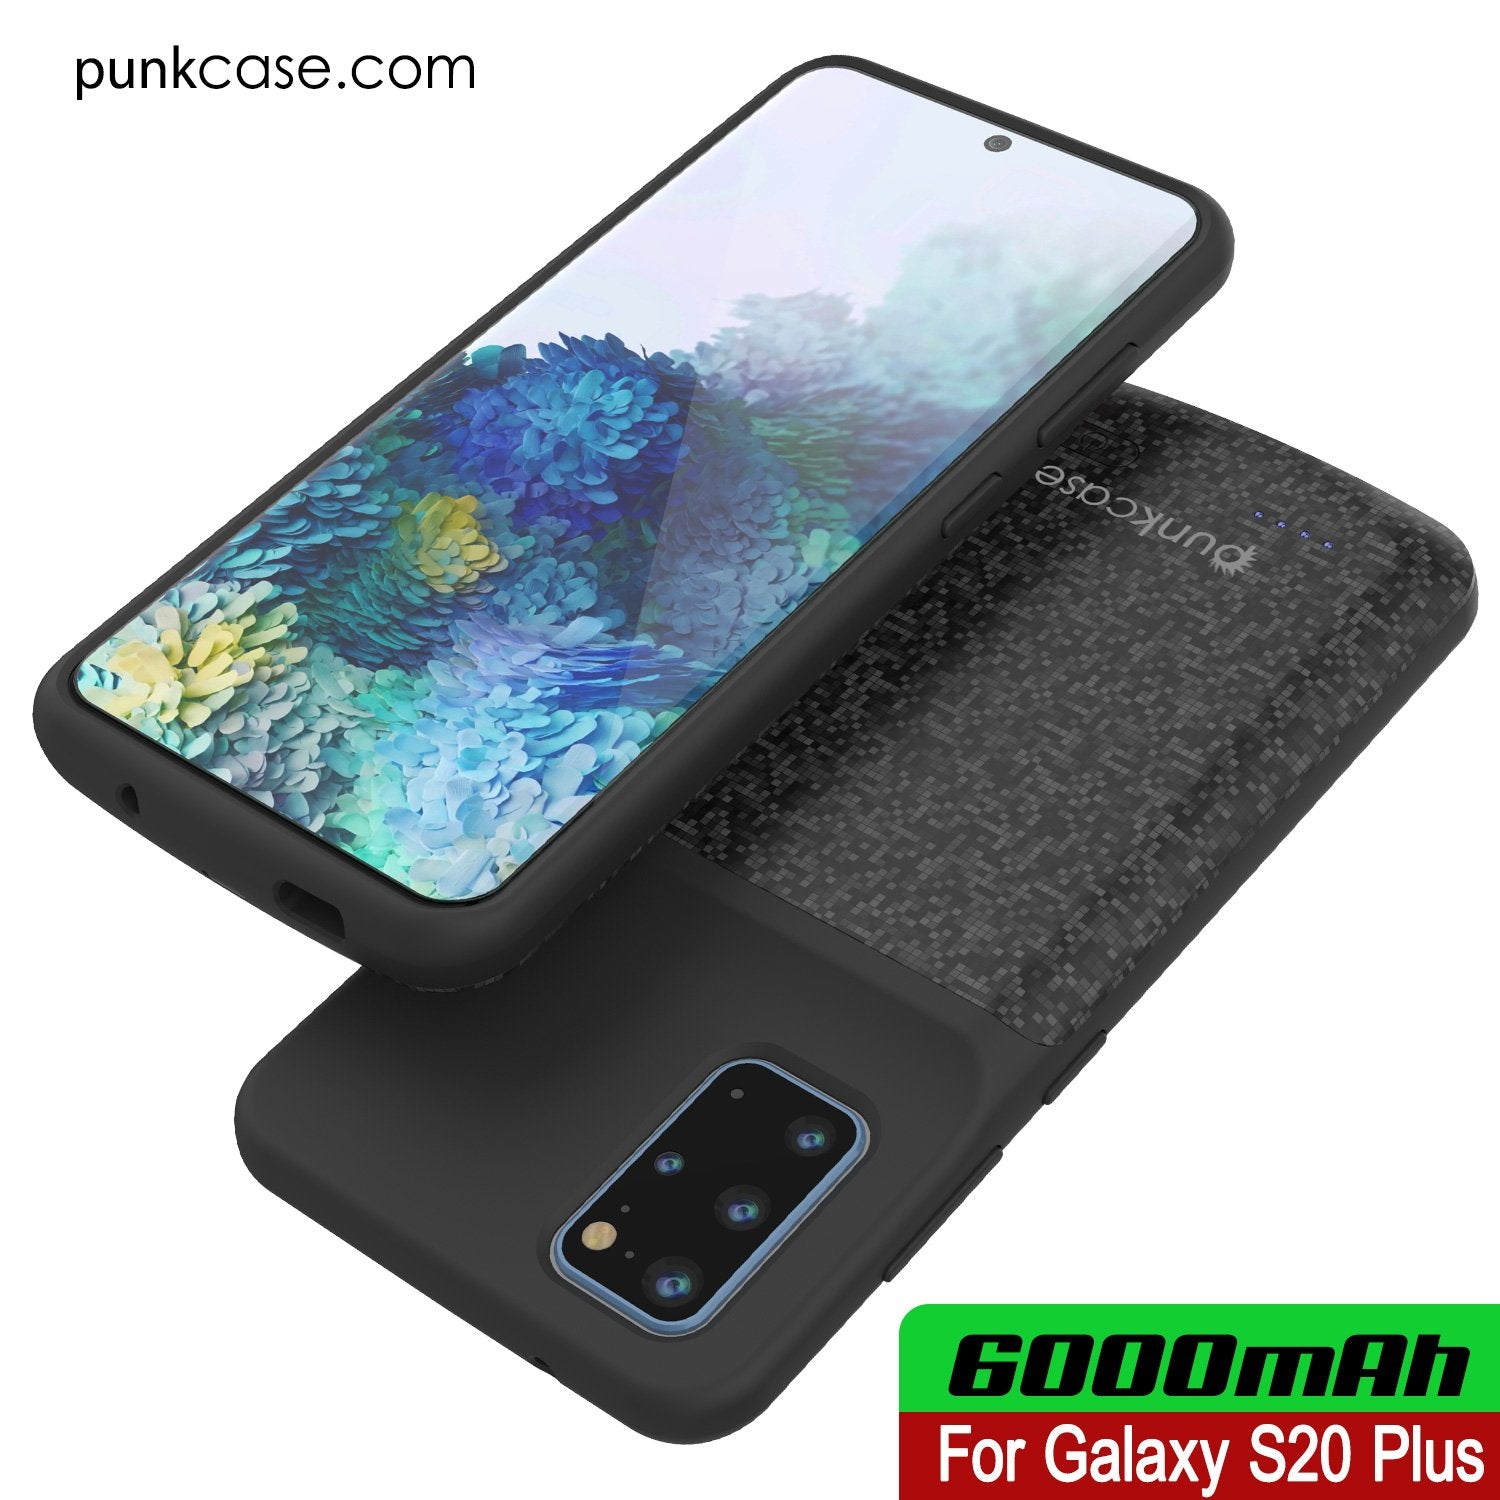 PunkJuice S20+ Plus Battery Case Patterned Black - Fast Charging Power Juice Bank with 6000mAh